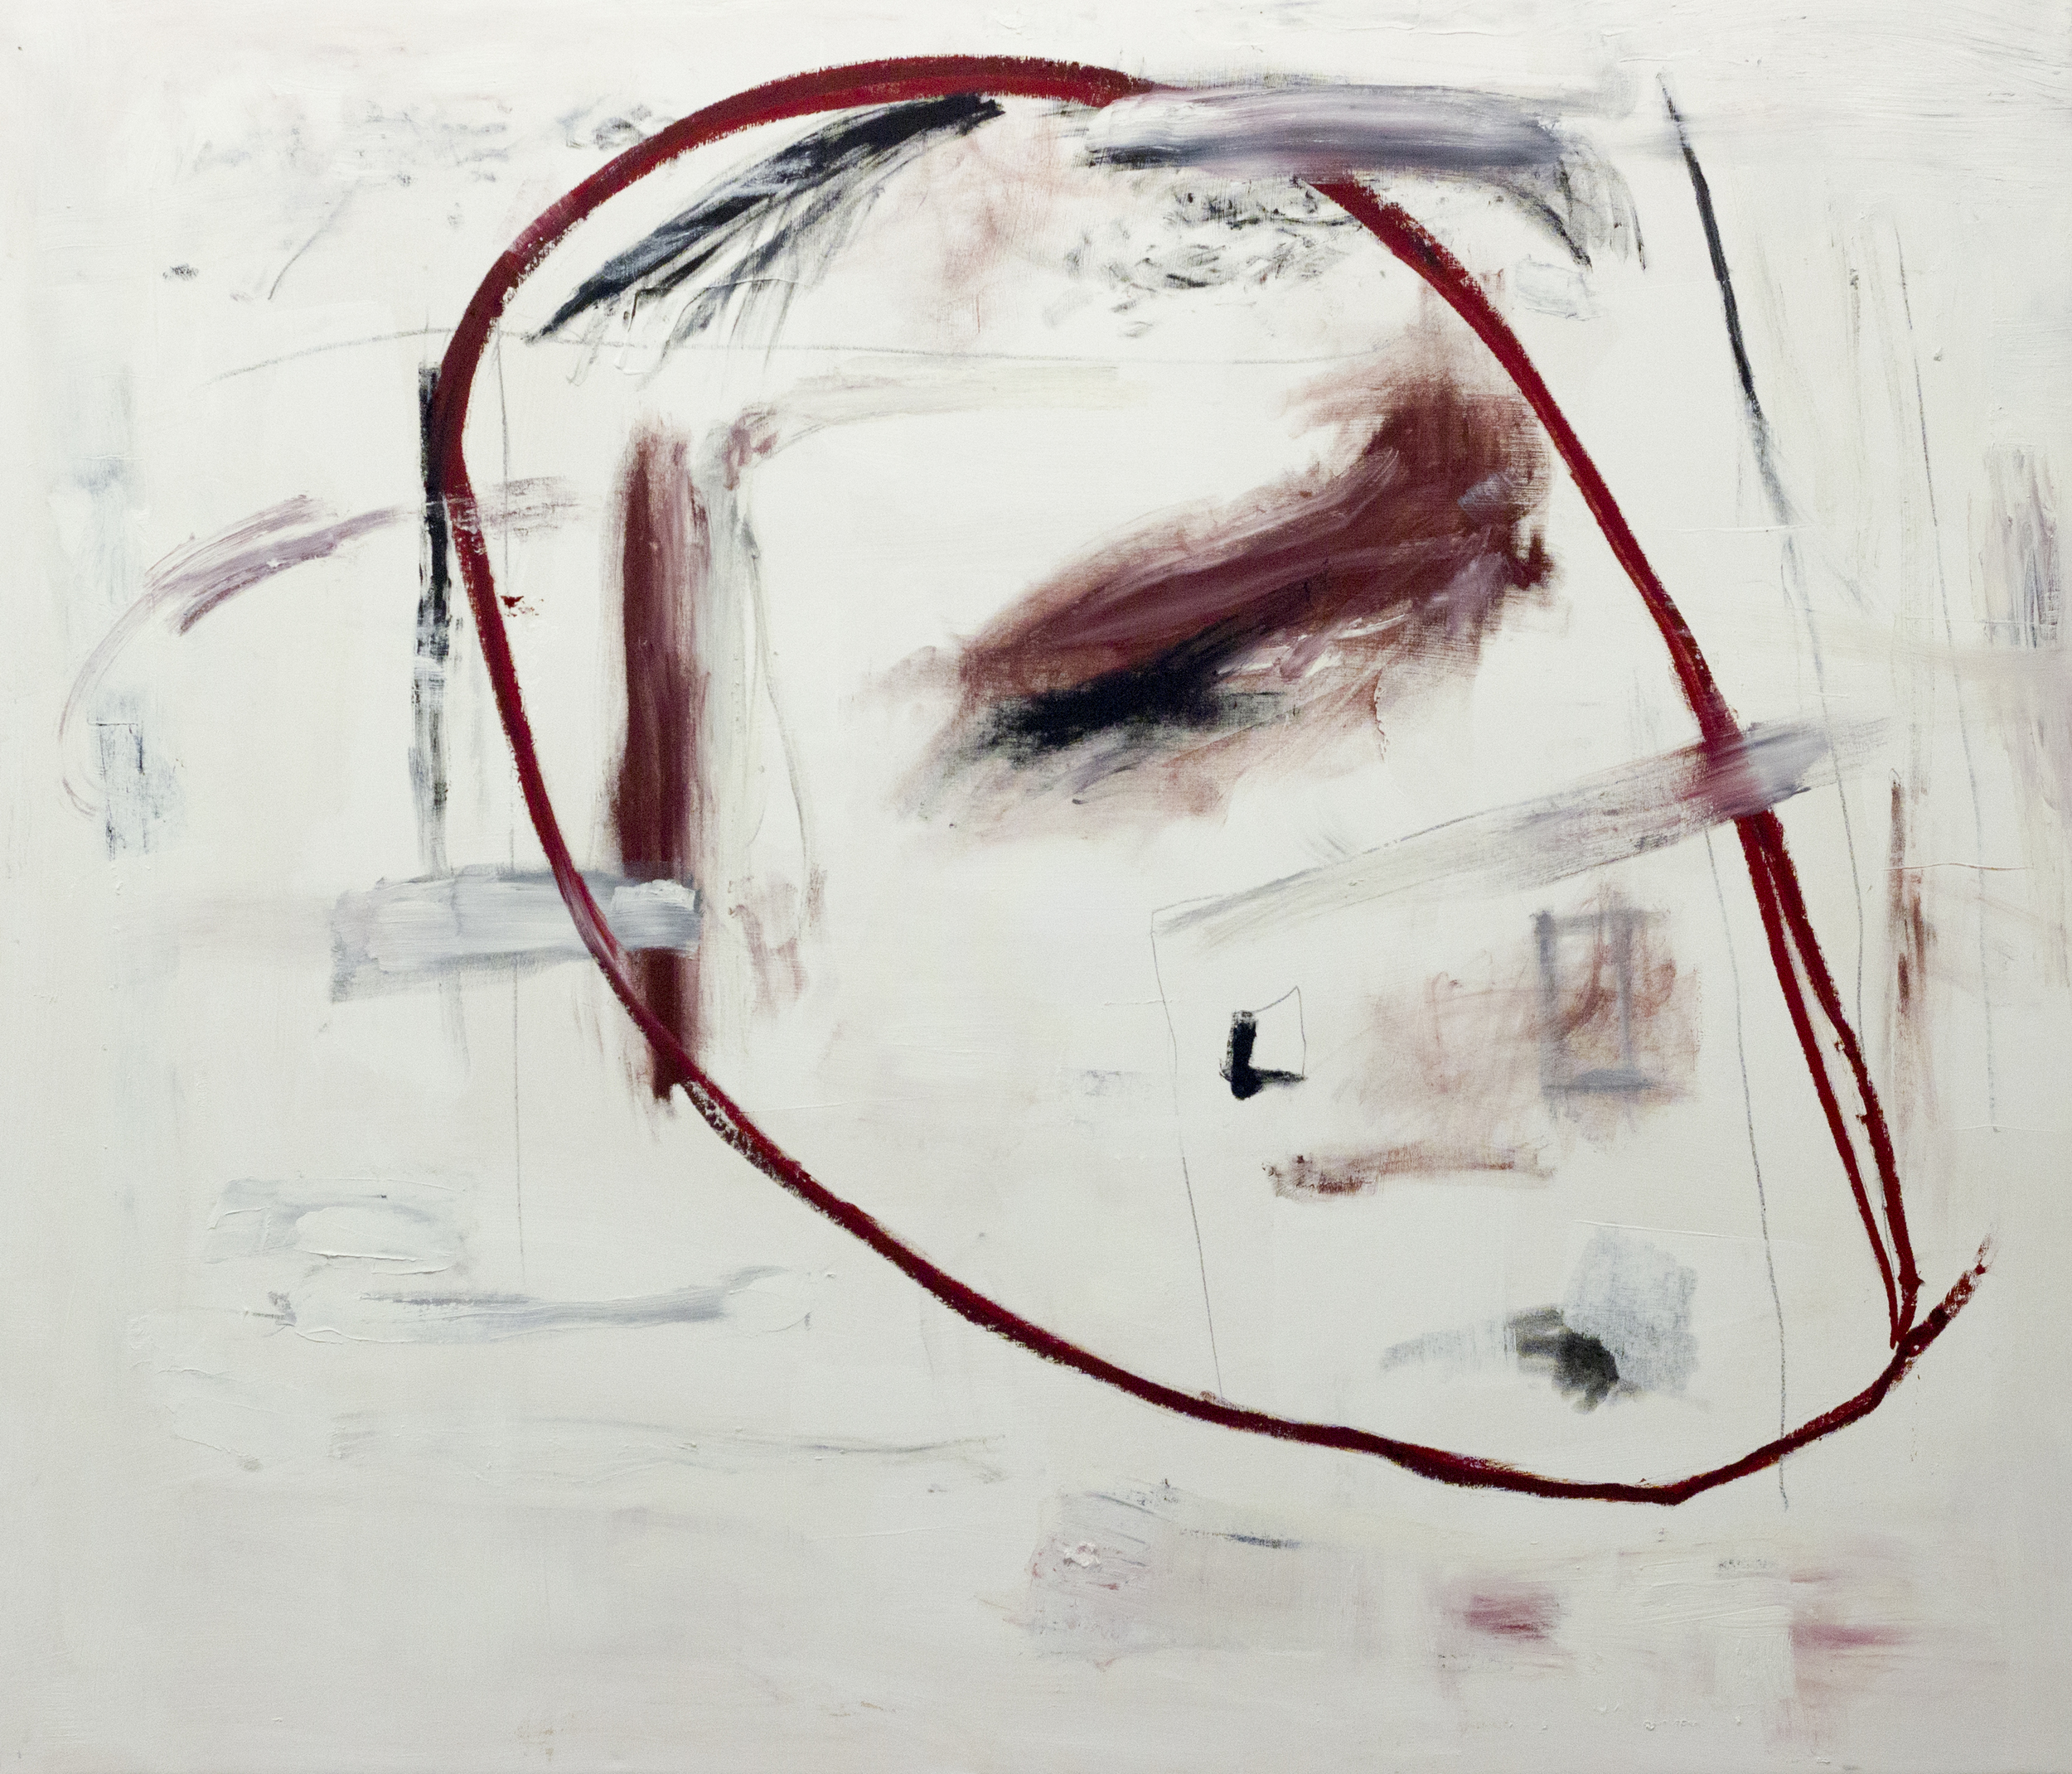   I in Myself in Another Person , 2015  54 x 64 Inches  Oil, Acrylic, Graphite, Charcoal, and Oil Stick on Canvas  Private Collection 